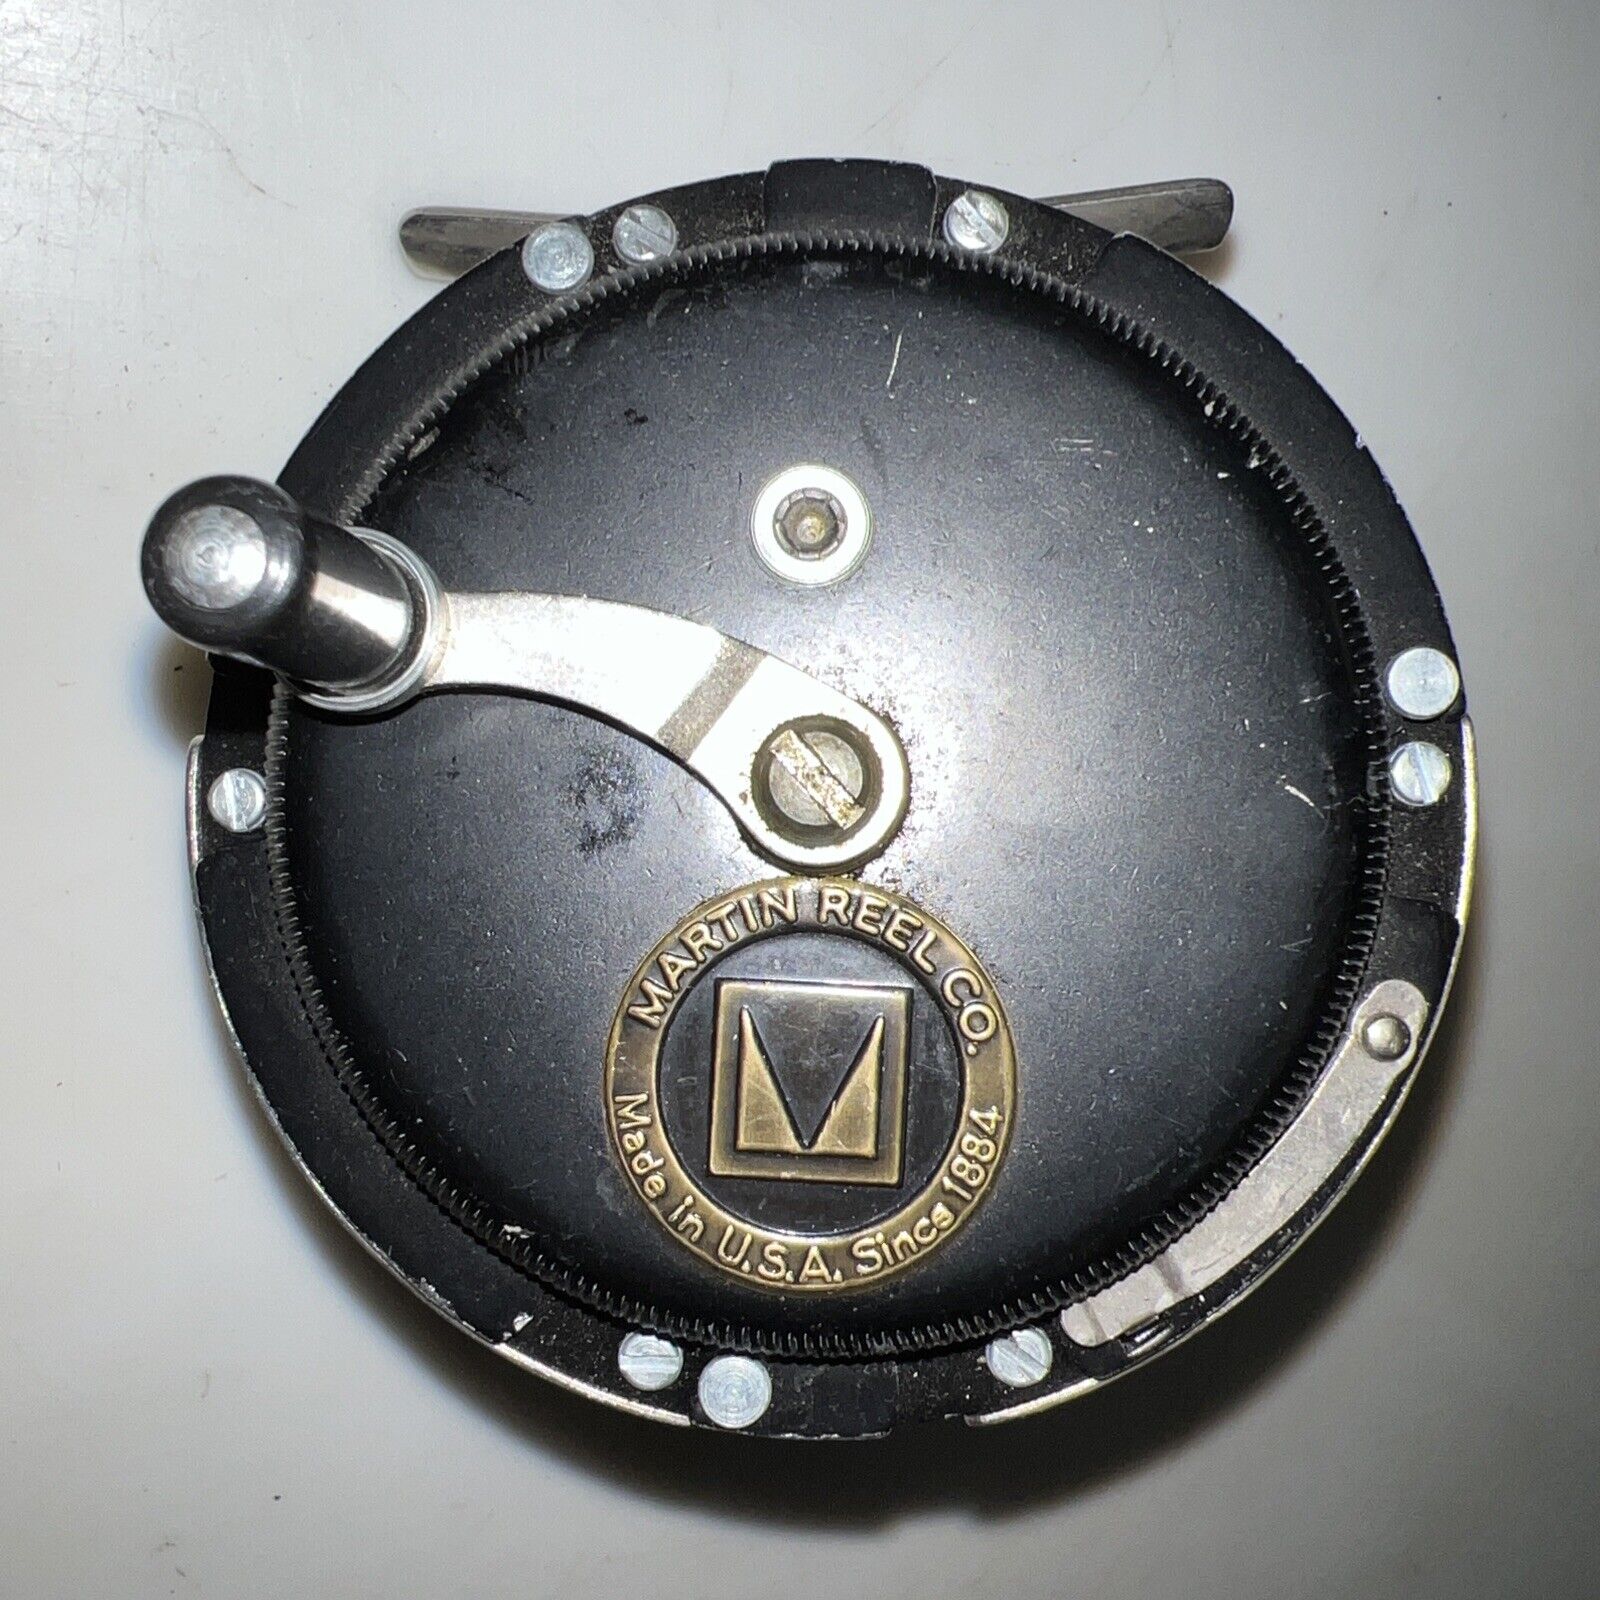 Martin 72 Fly Fishing Reel. Made in USA.!!!!!!!